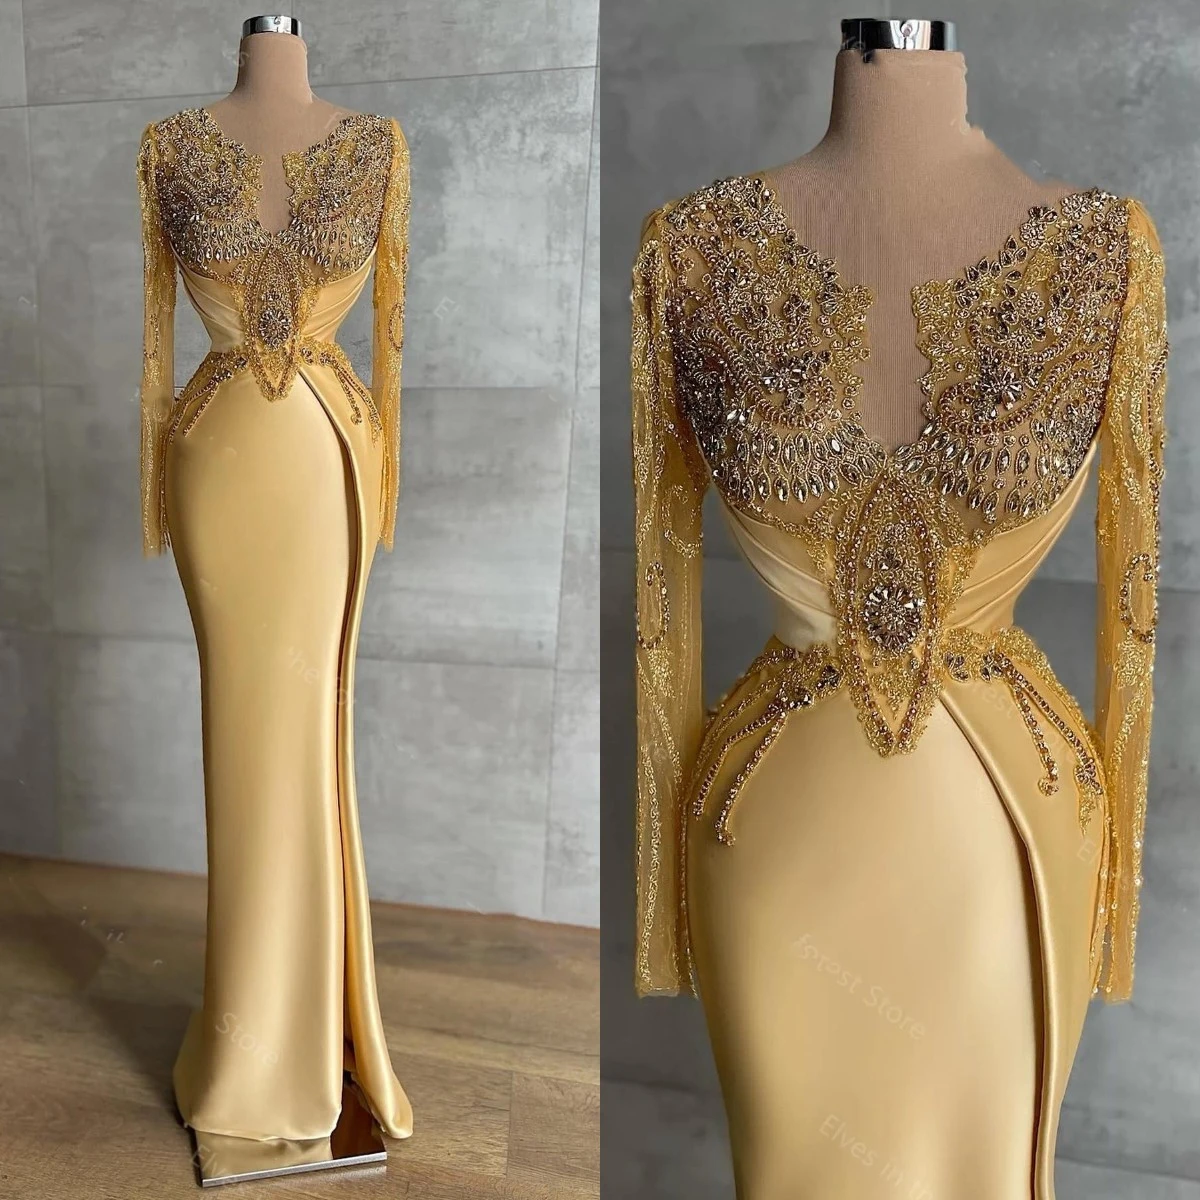 beautiful prom dresses Gold Mermaid Satin Prom Dresses Appliques Long Sleeves Shiny Beads Crystals High Split Party Evening Gowns Robe De Soiree prom gowns